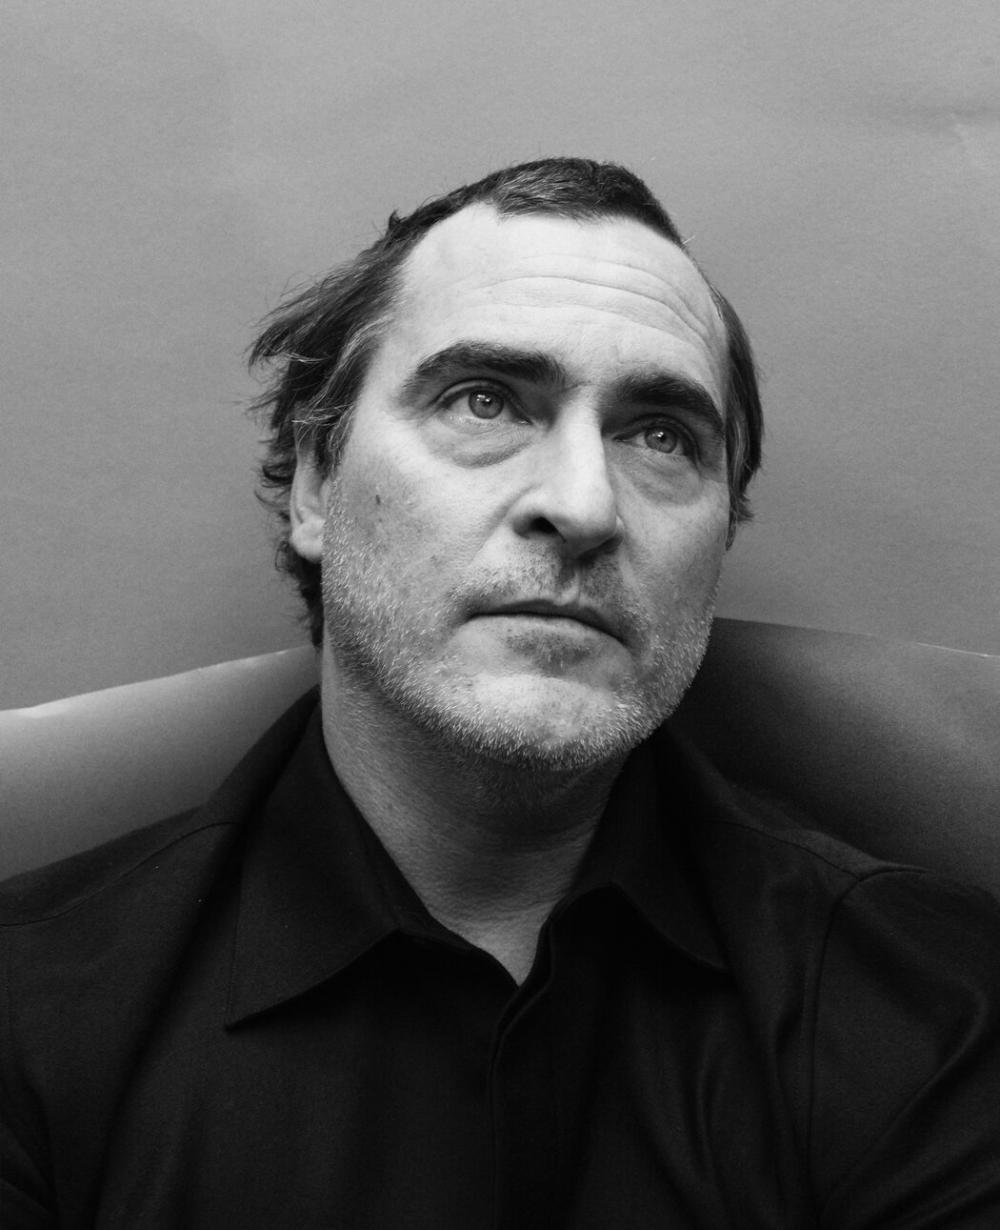 Joaquin Phoenix by Ruven Afanador for The New York Times Magazine December 2021